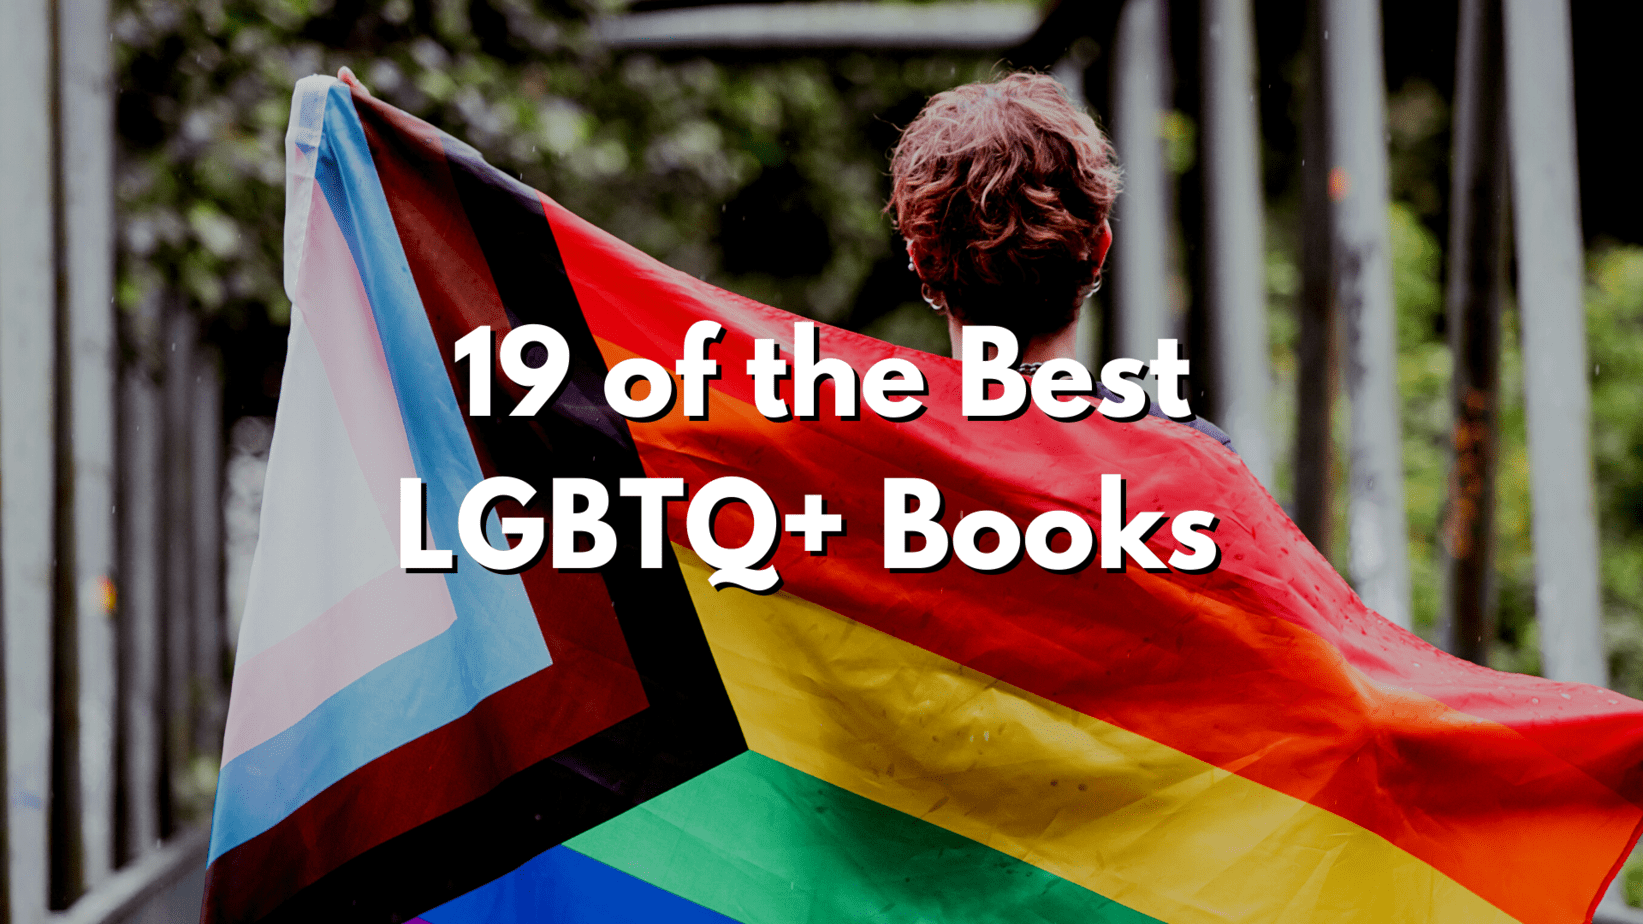 A person with short hair holds up a LGBTQ pride flag behind white text that reads" 19 of the Best LGBTQ+ Books"